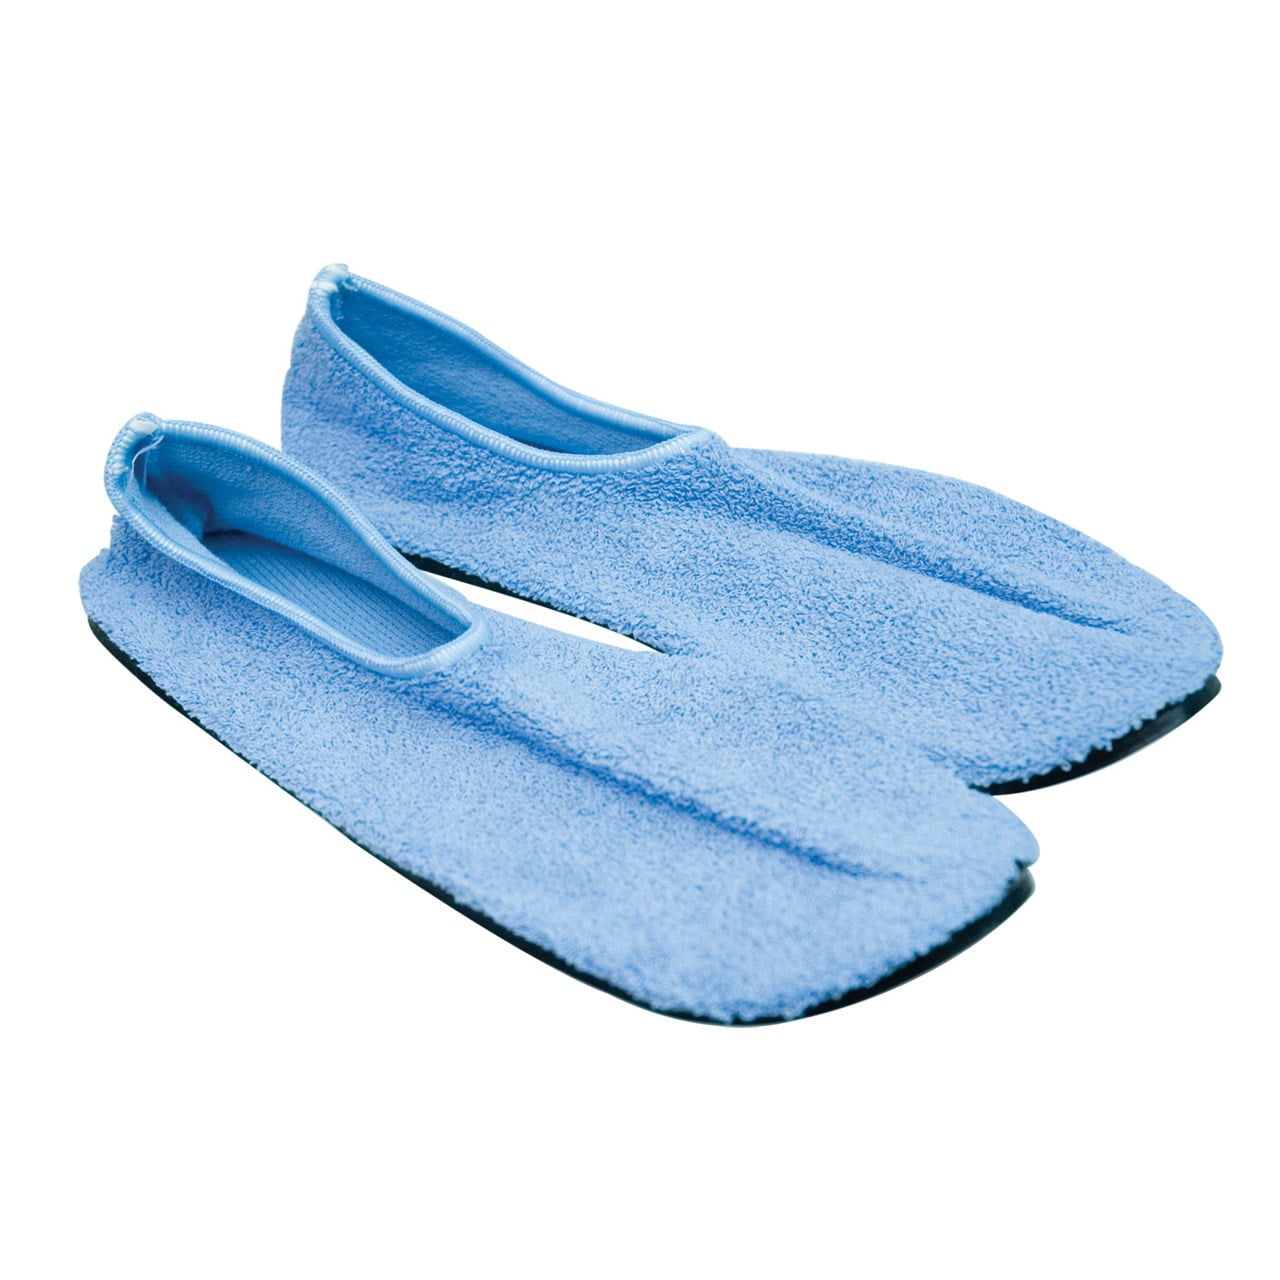 mens terry cloth slippers